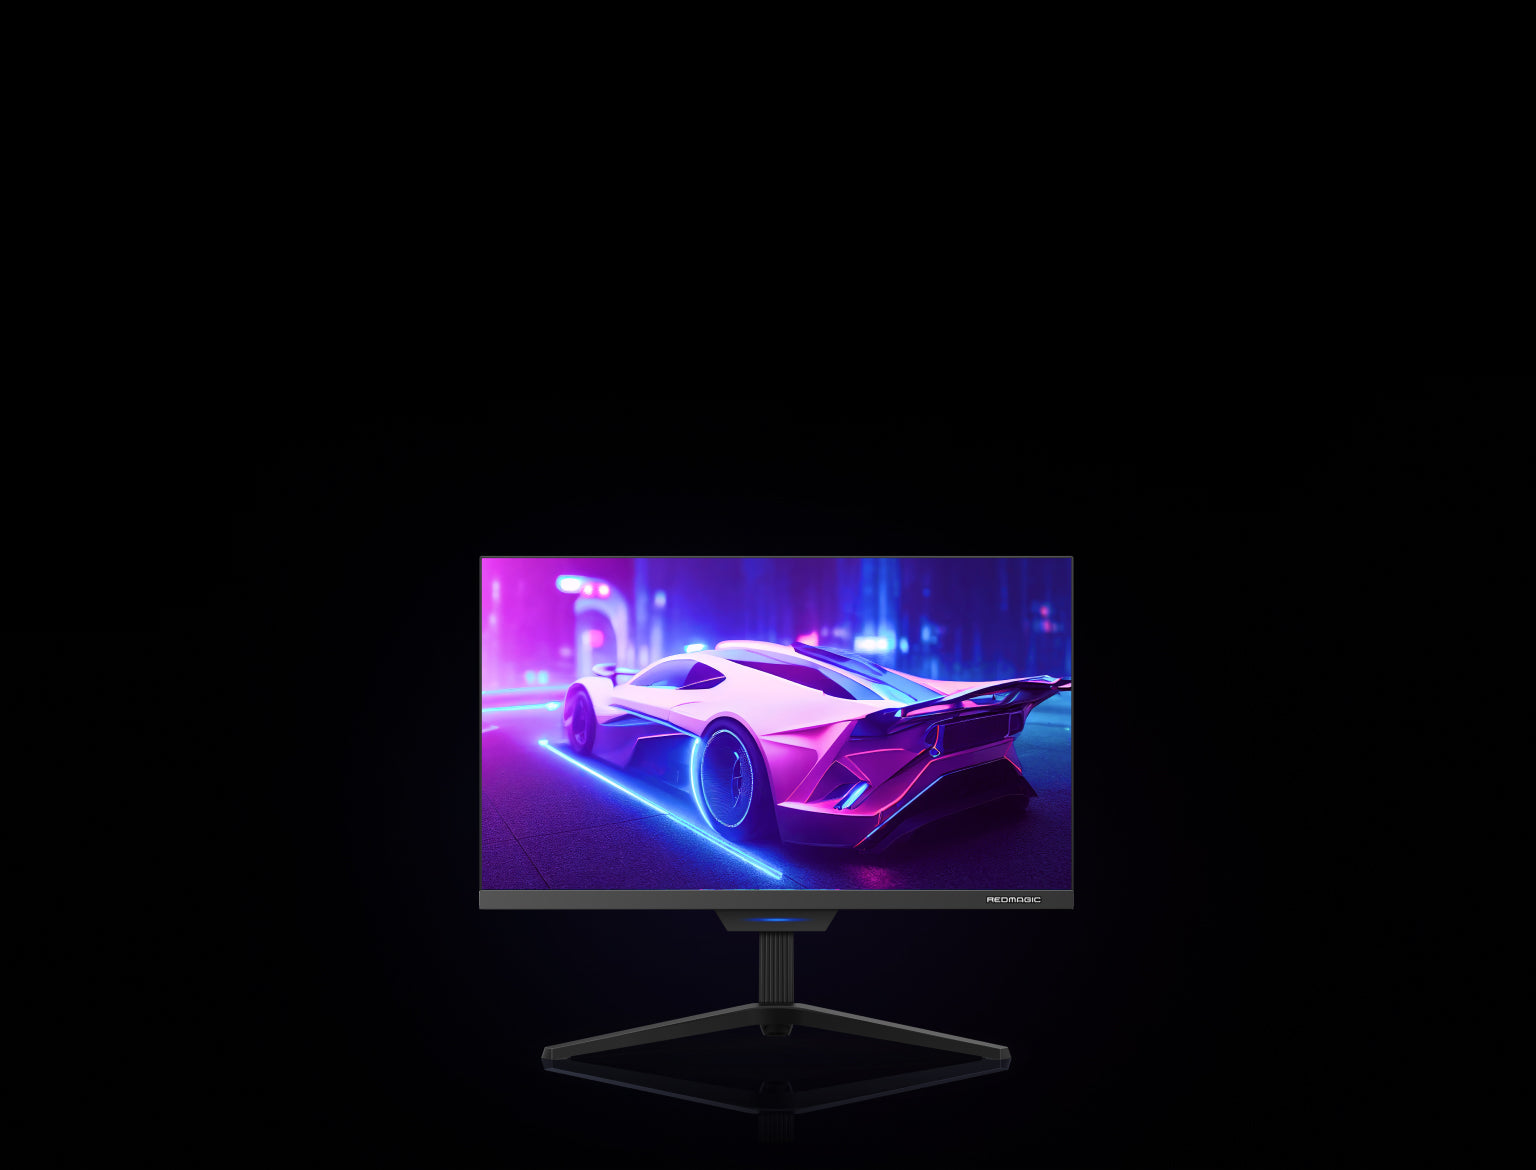 REDMAGIC 4K Gaming Monitor - Product Page - REDMAGIC (US and Canada)